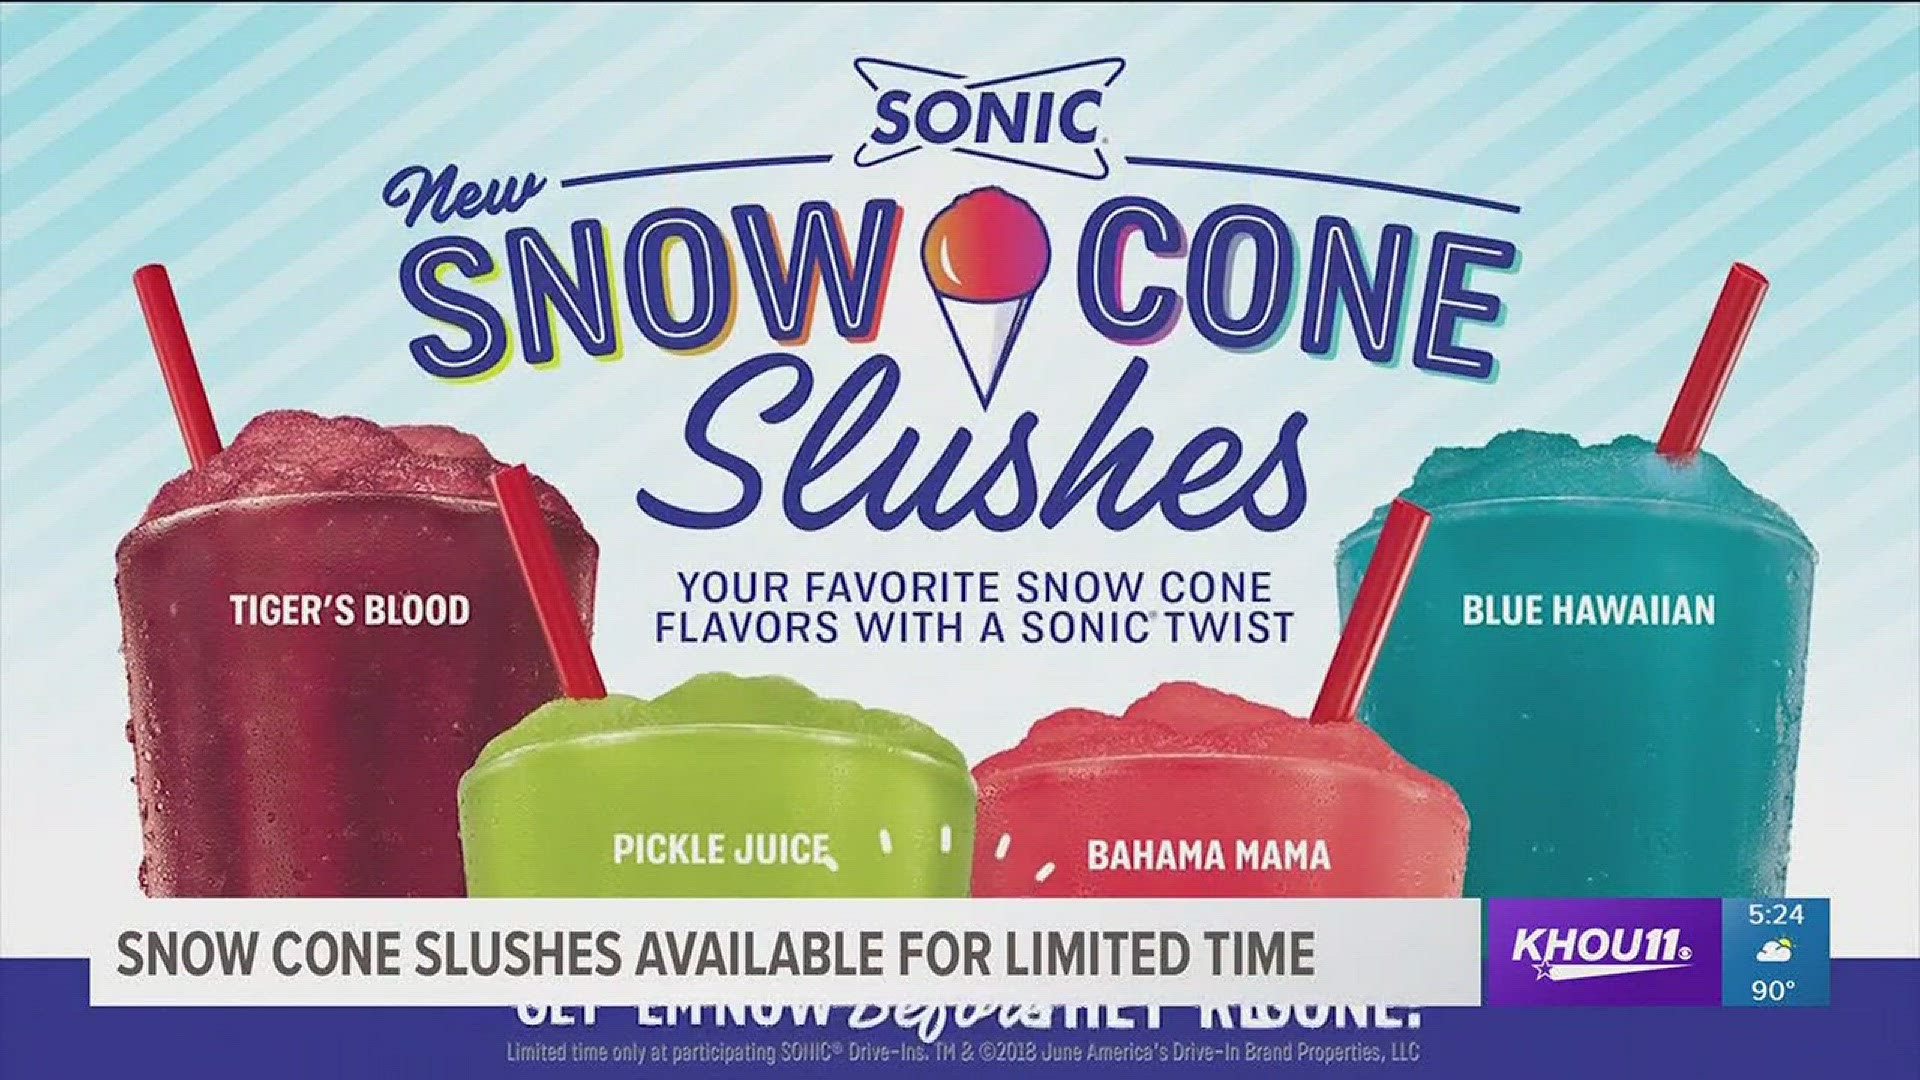 Sonic debuted it's new snow cone slushes that includes a pickle juice slush. The pickle juice slush, along with many other new flavors, are available for a limited time.